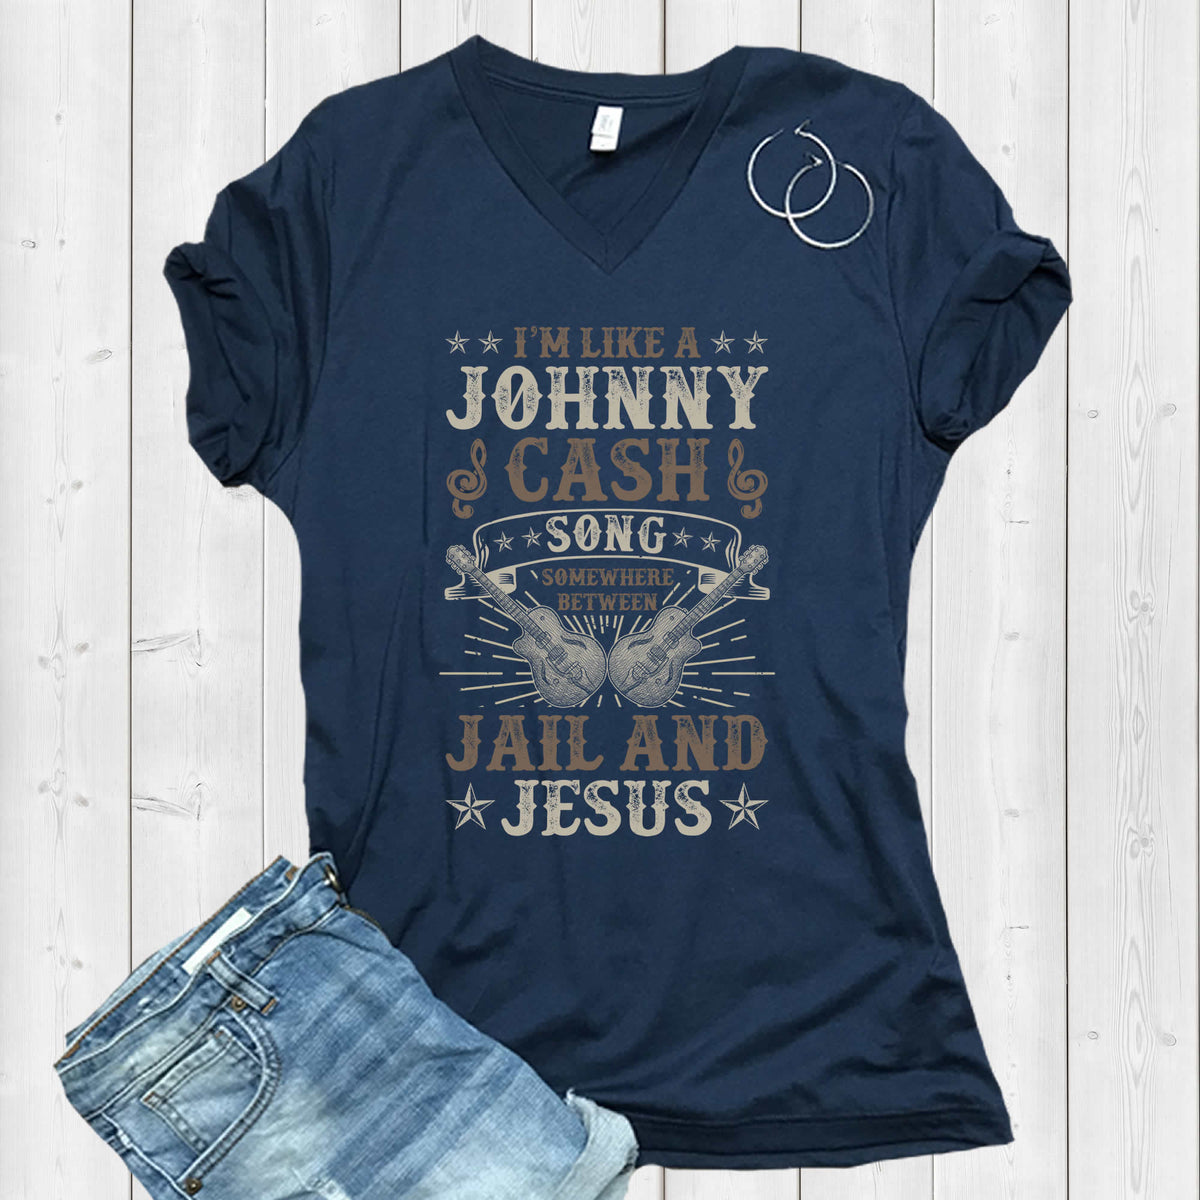 Jesus & Jail Johnny Cash Song Guitar Shirt | Country Western Graphic Tees | Unisex Jersey V-neck T-shirt